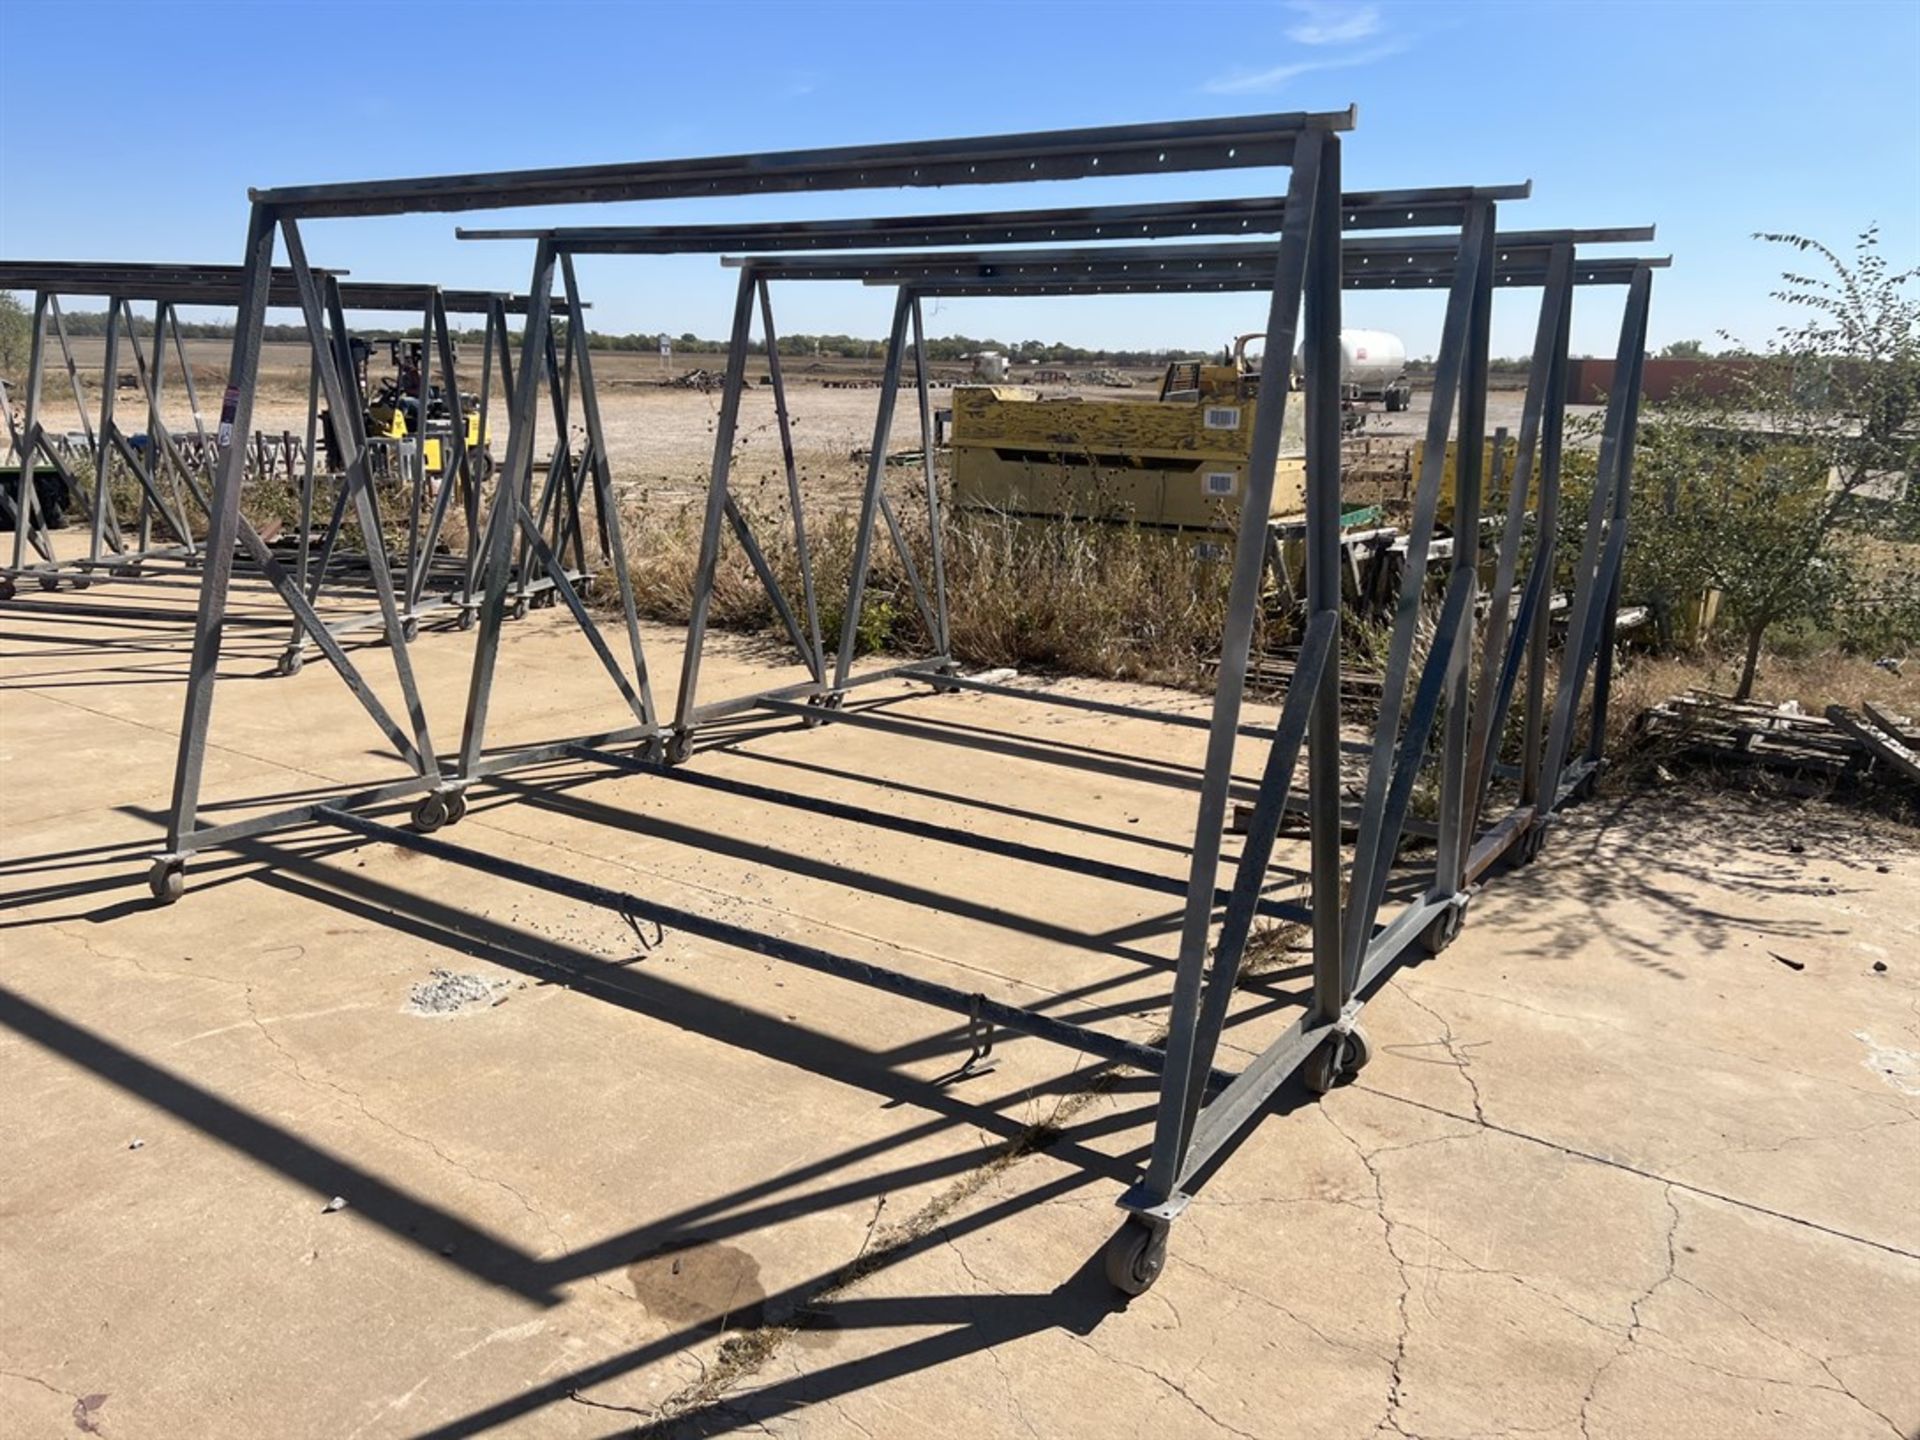 Lot of (4) Paint Drying Racks, 7'H x 11'W - Image 2 of 2